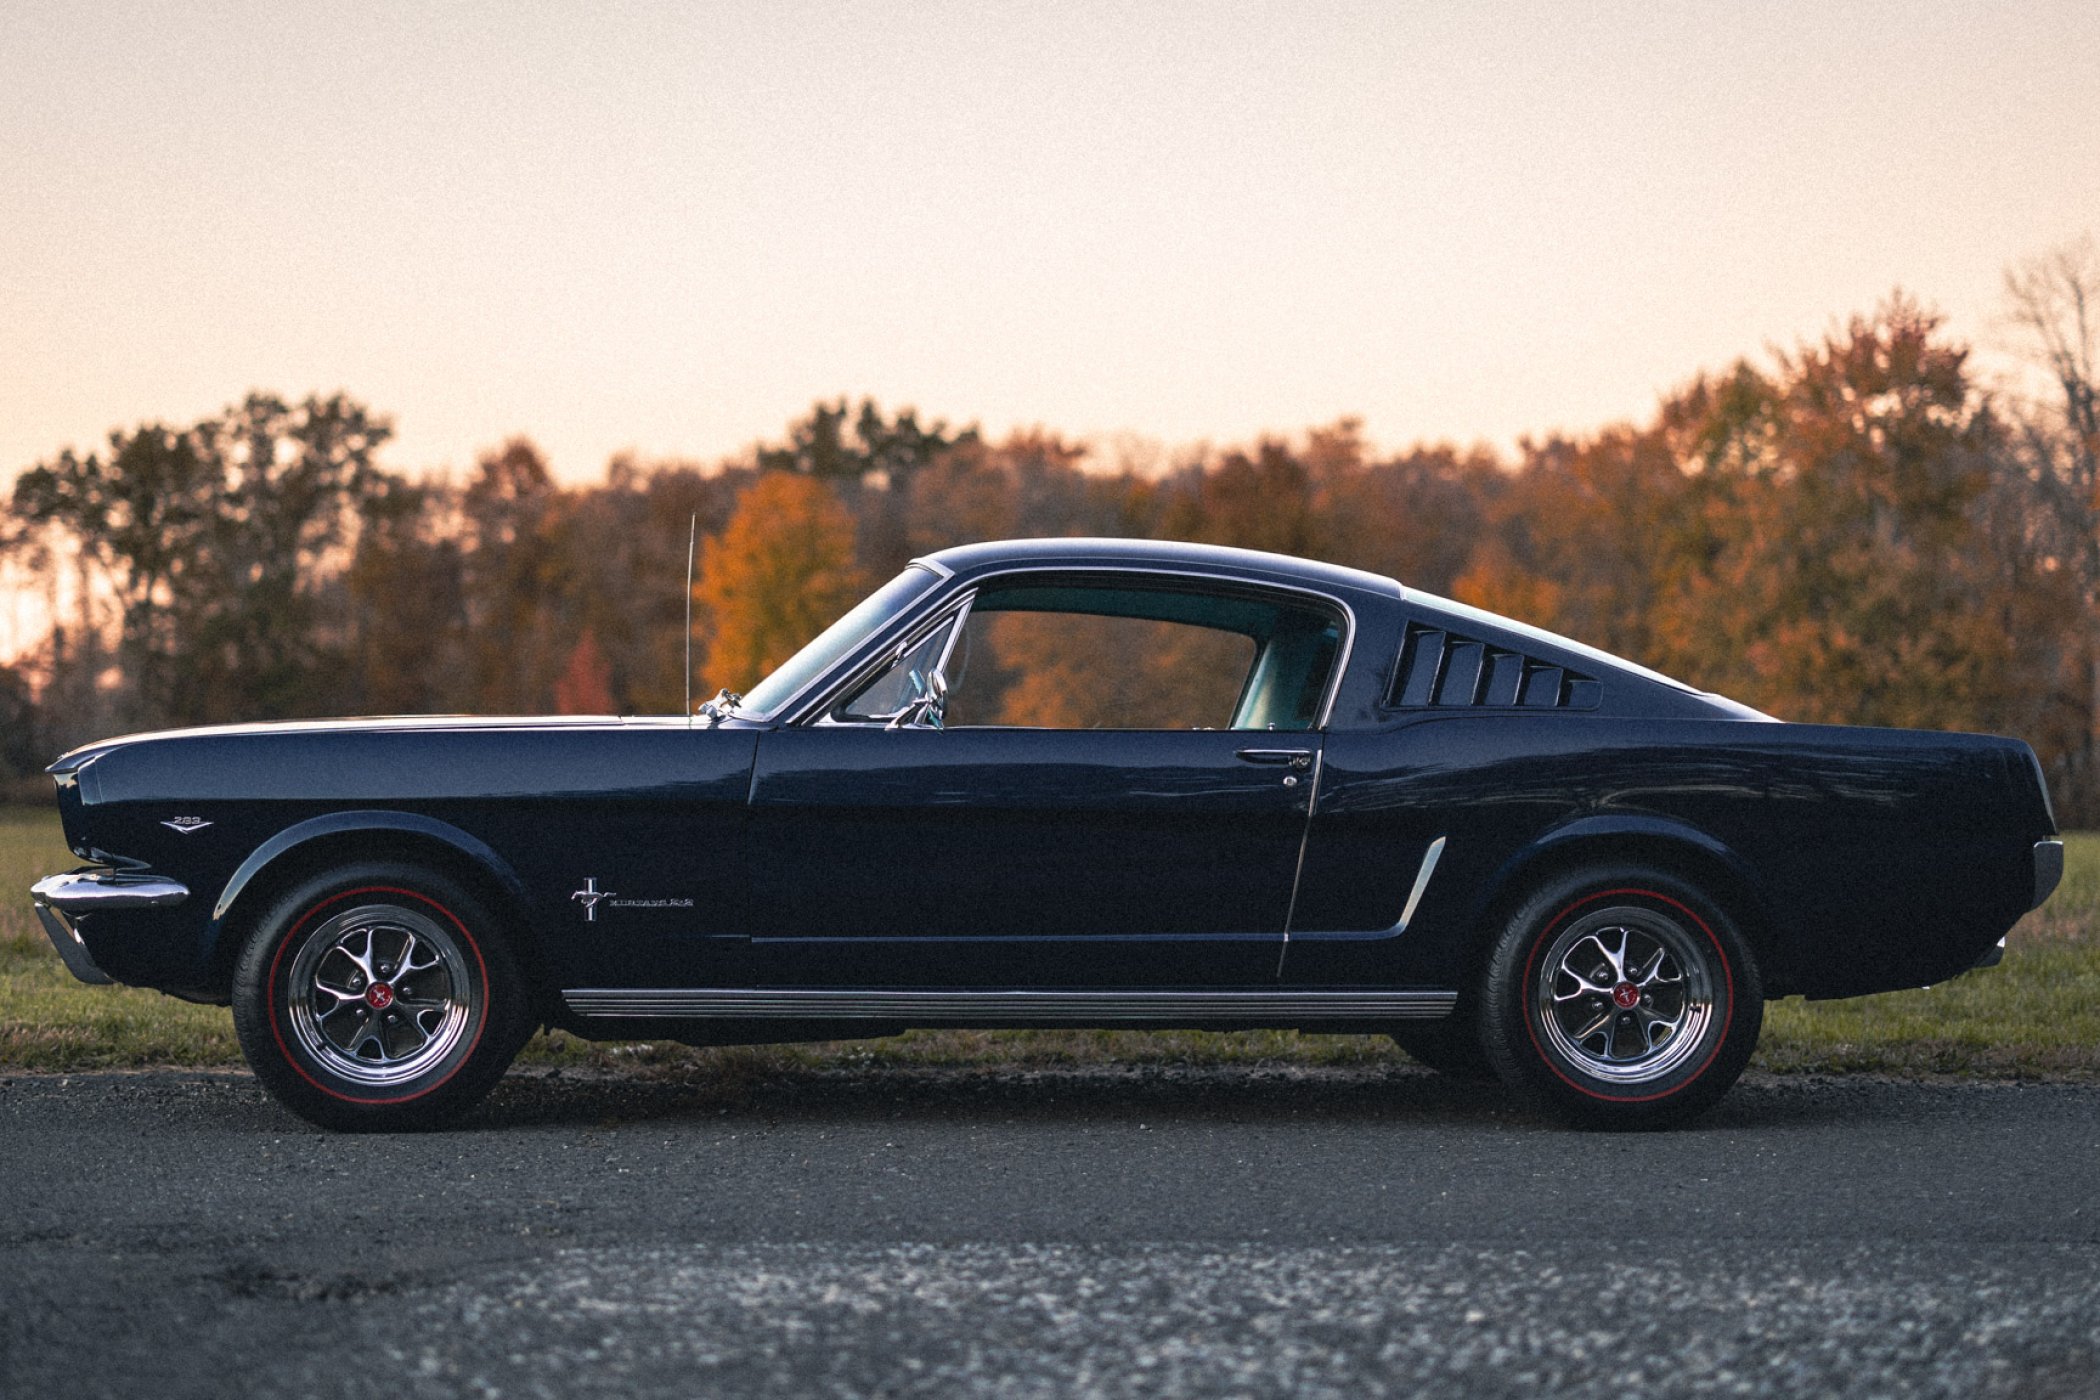 1966 Ford Mustang fastback 2+2